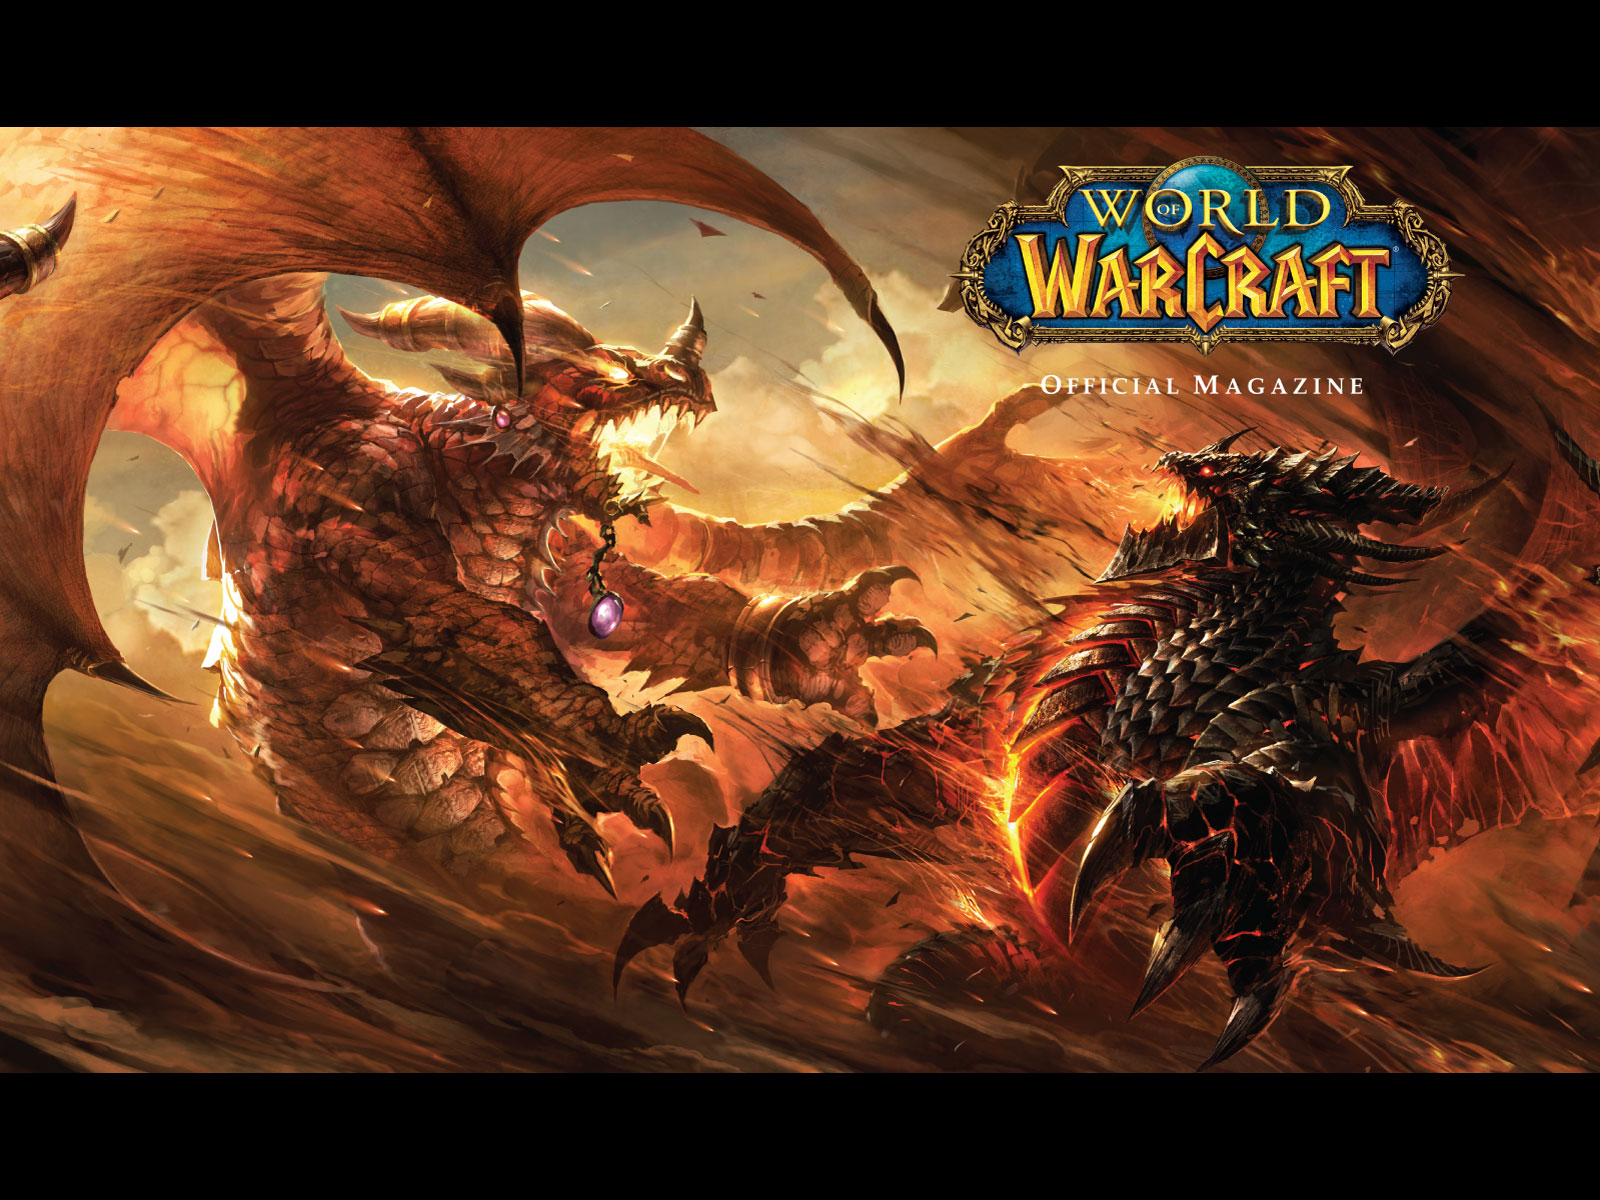 World of Warcraft: The Magazine - WoWWiki - Your guide to the World of